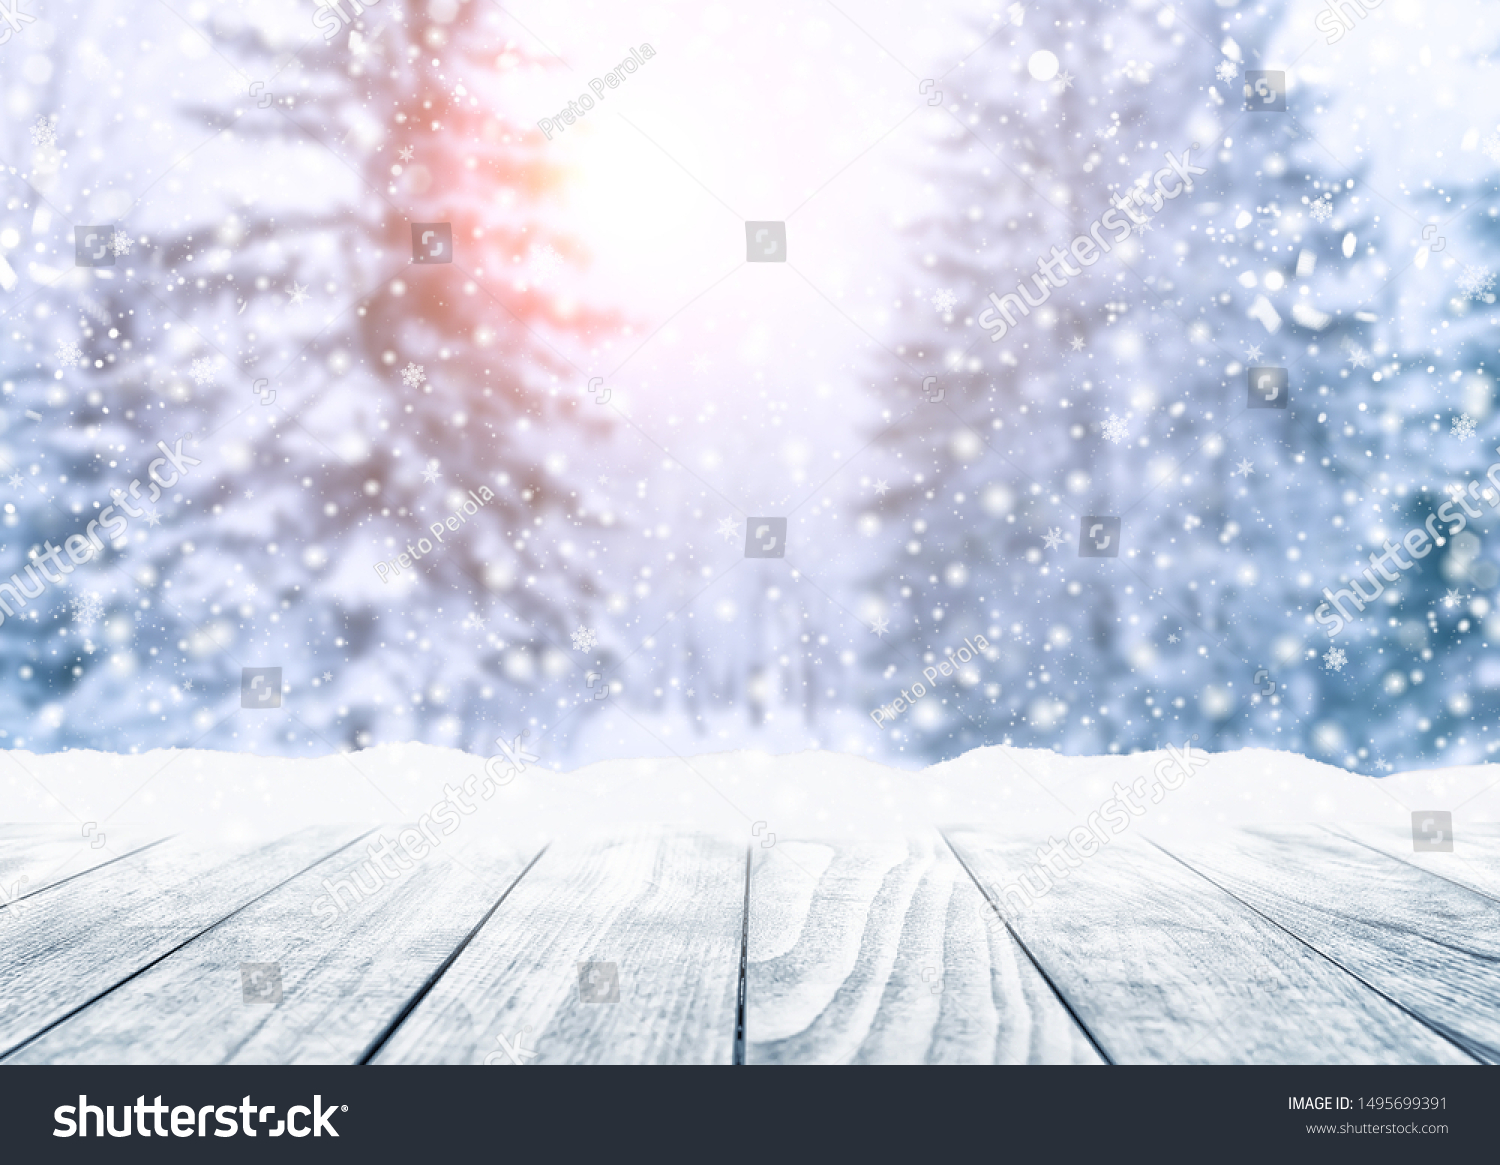 Wooden table top on winter sunny landscape with fir trees. Merry Christmas and happy New Year greeting background. Winter landscape with snow and christmas trees.  #1495699391